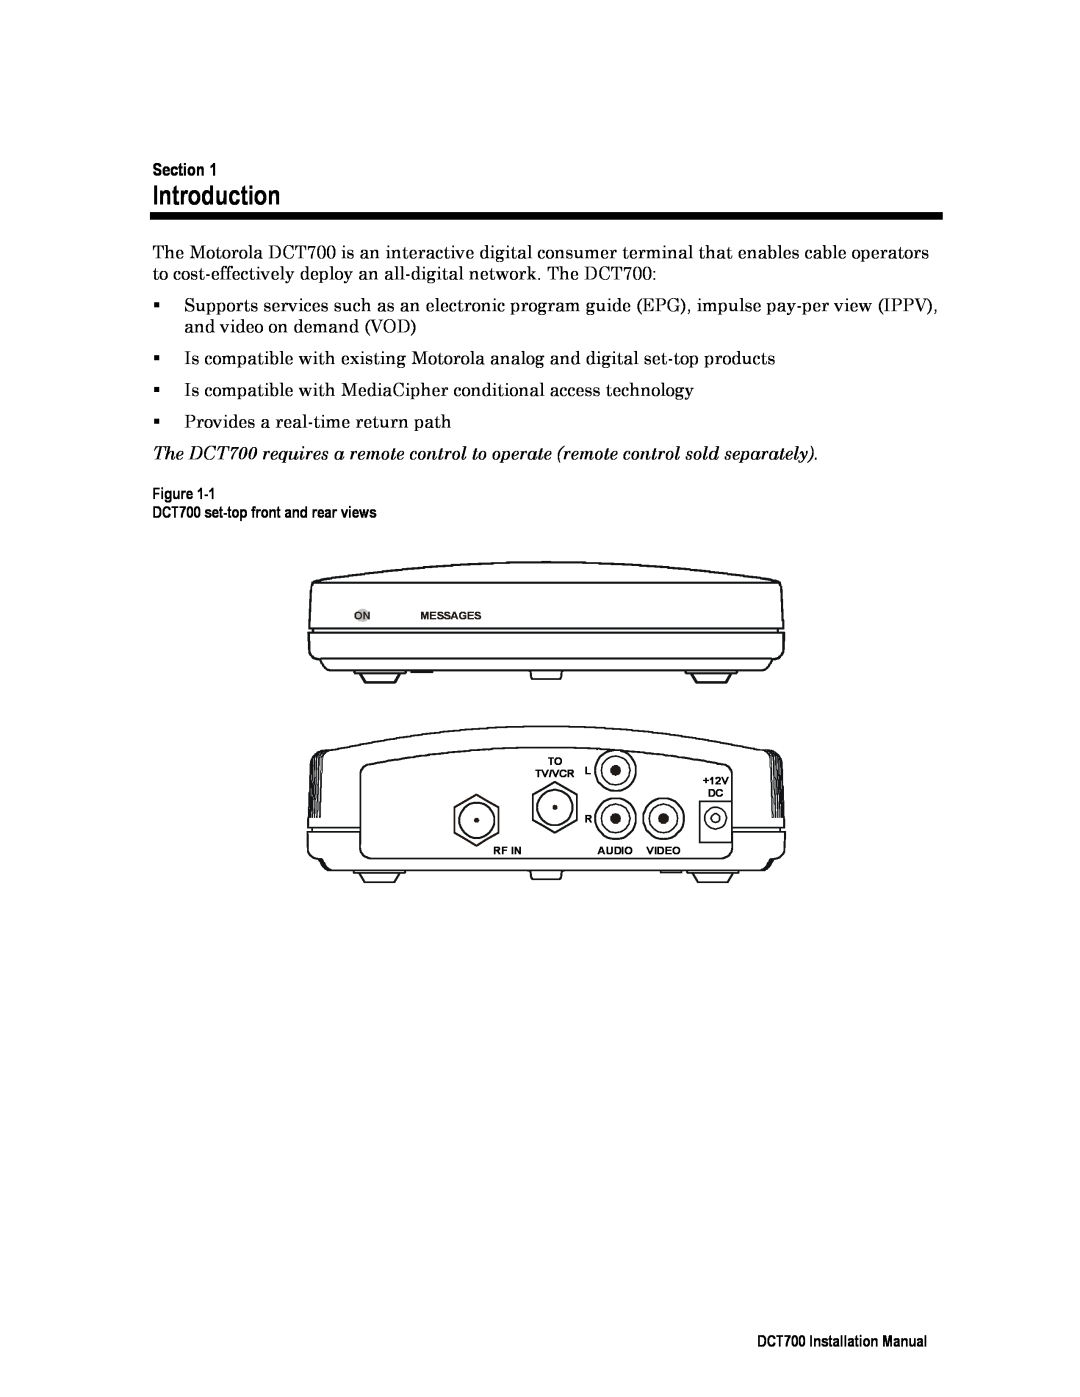 Motorola DTC700, DCT700 installation manual Introduction, Section 